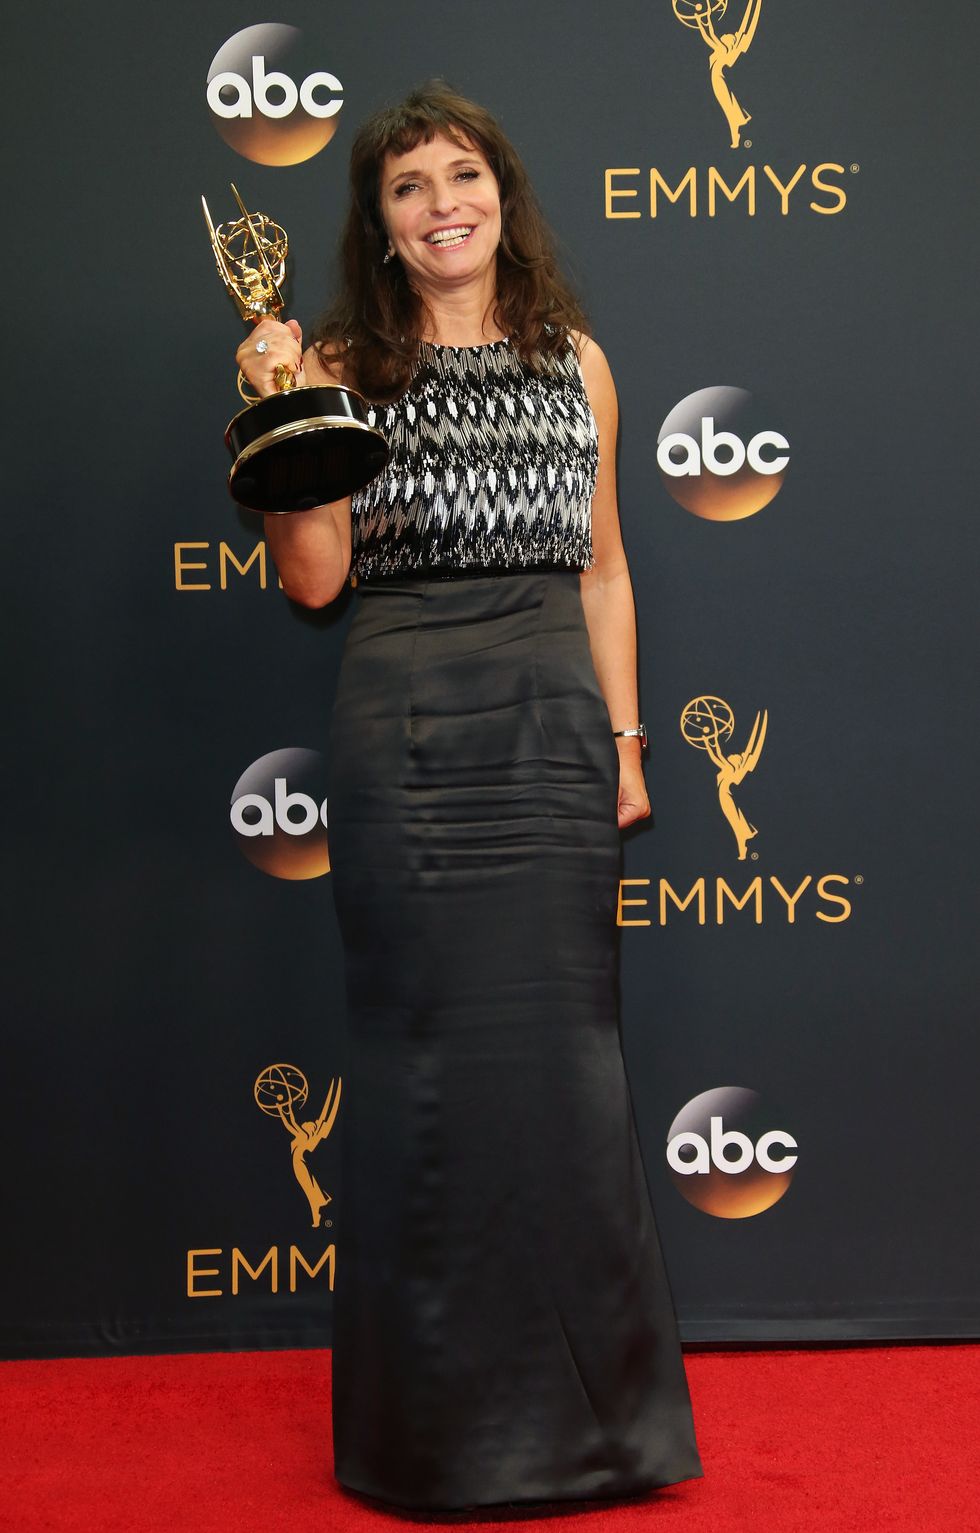 The Night Manager director Susanne Bier at the 68th Annual Primetime Emmy Awards